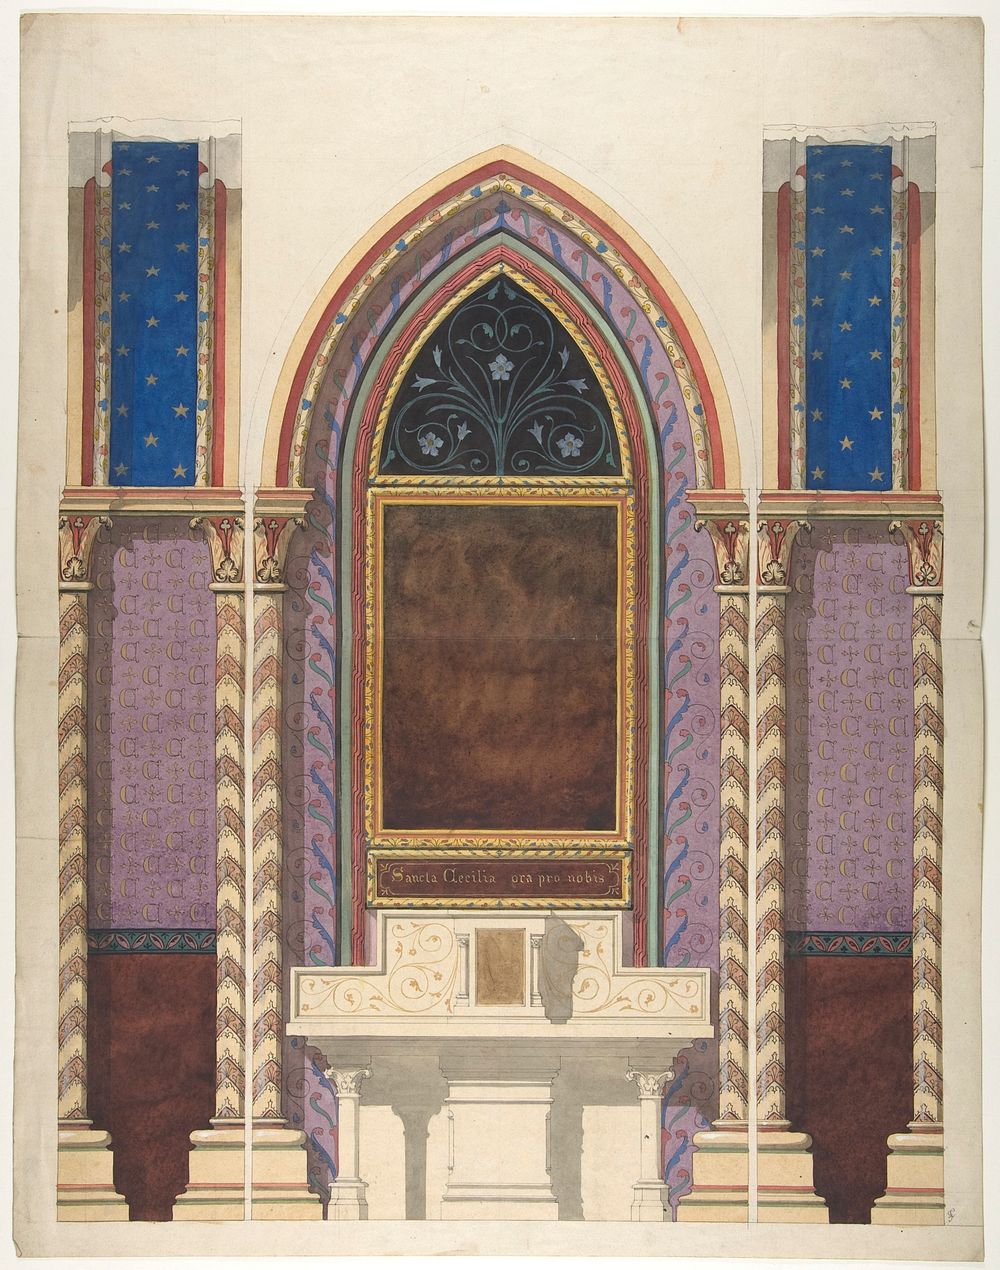 Elevation of a design for an altar and painted wall decoration by Jules-Edmond-Charles Lachaise and Eugène-Pierre Gourdet